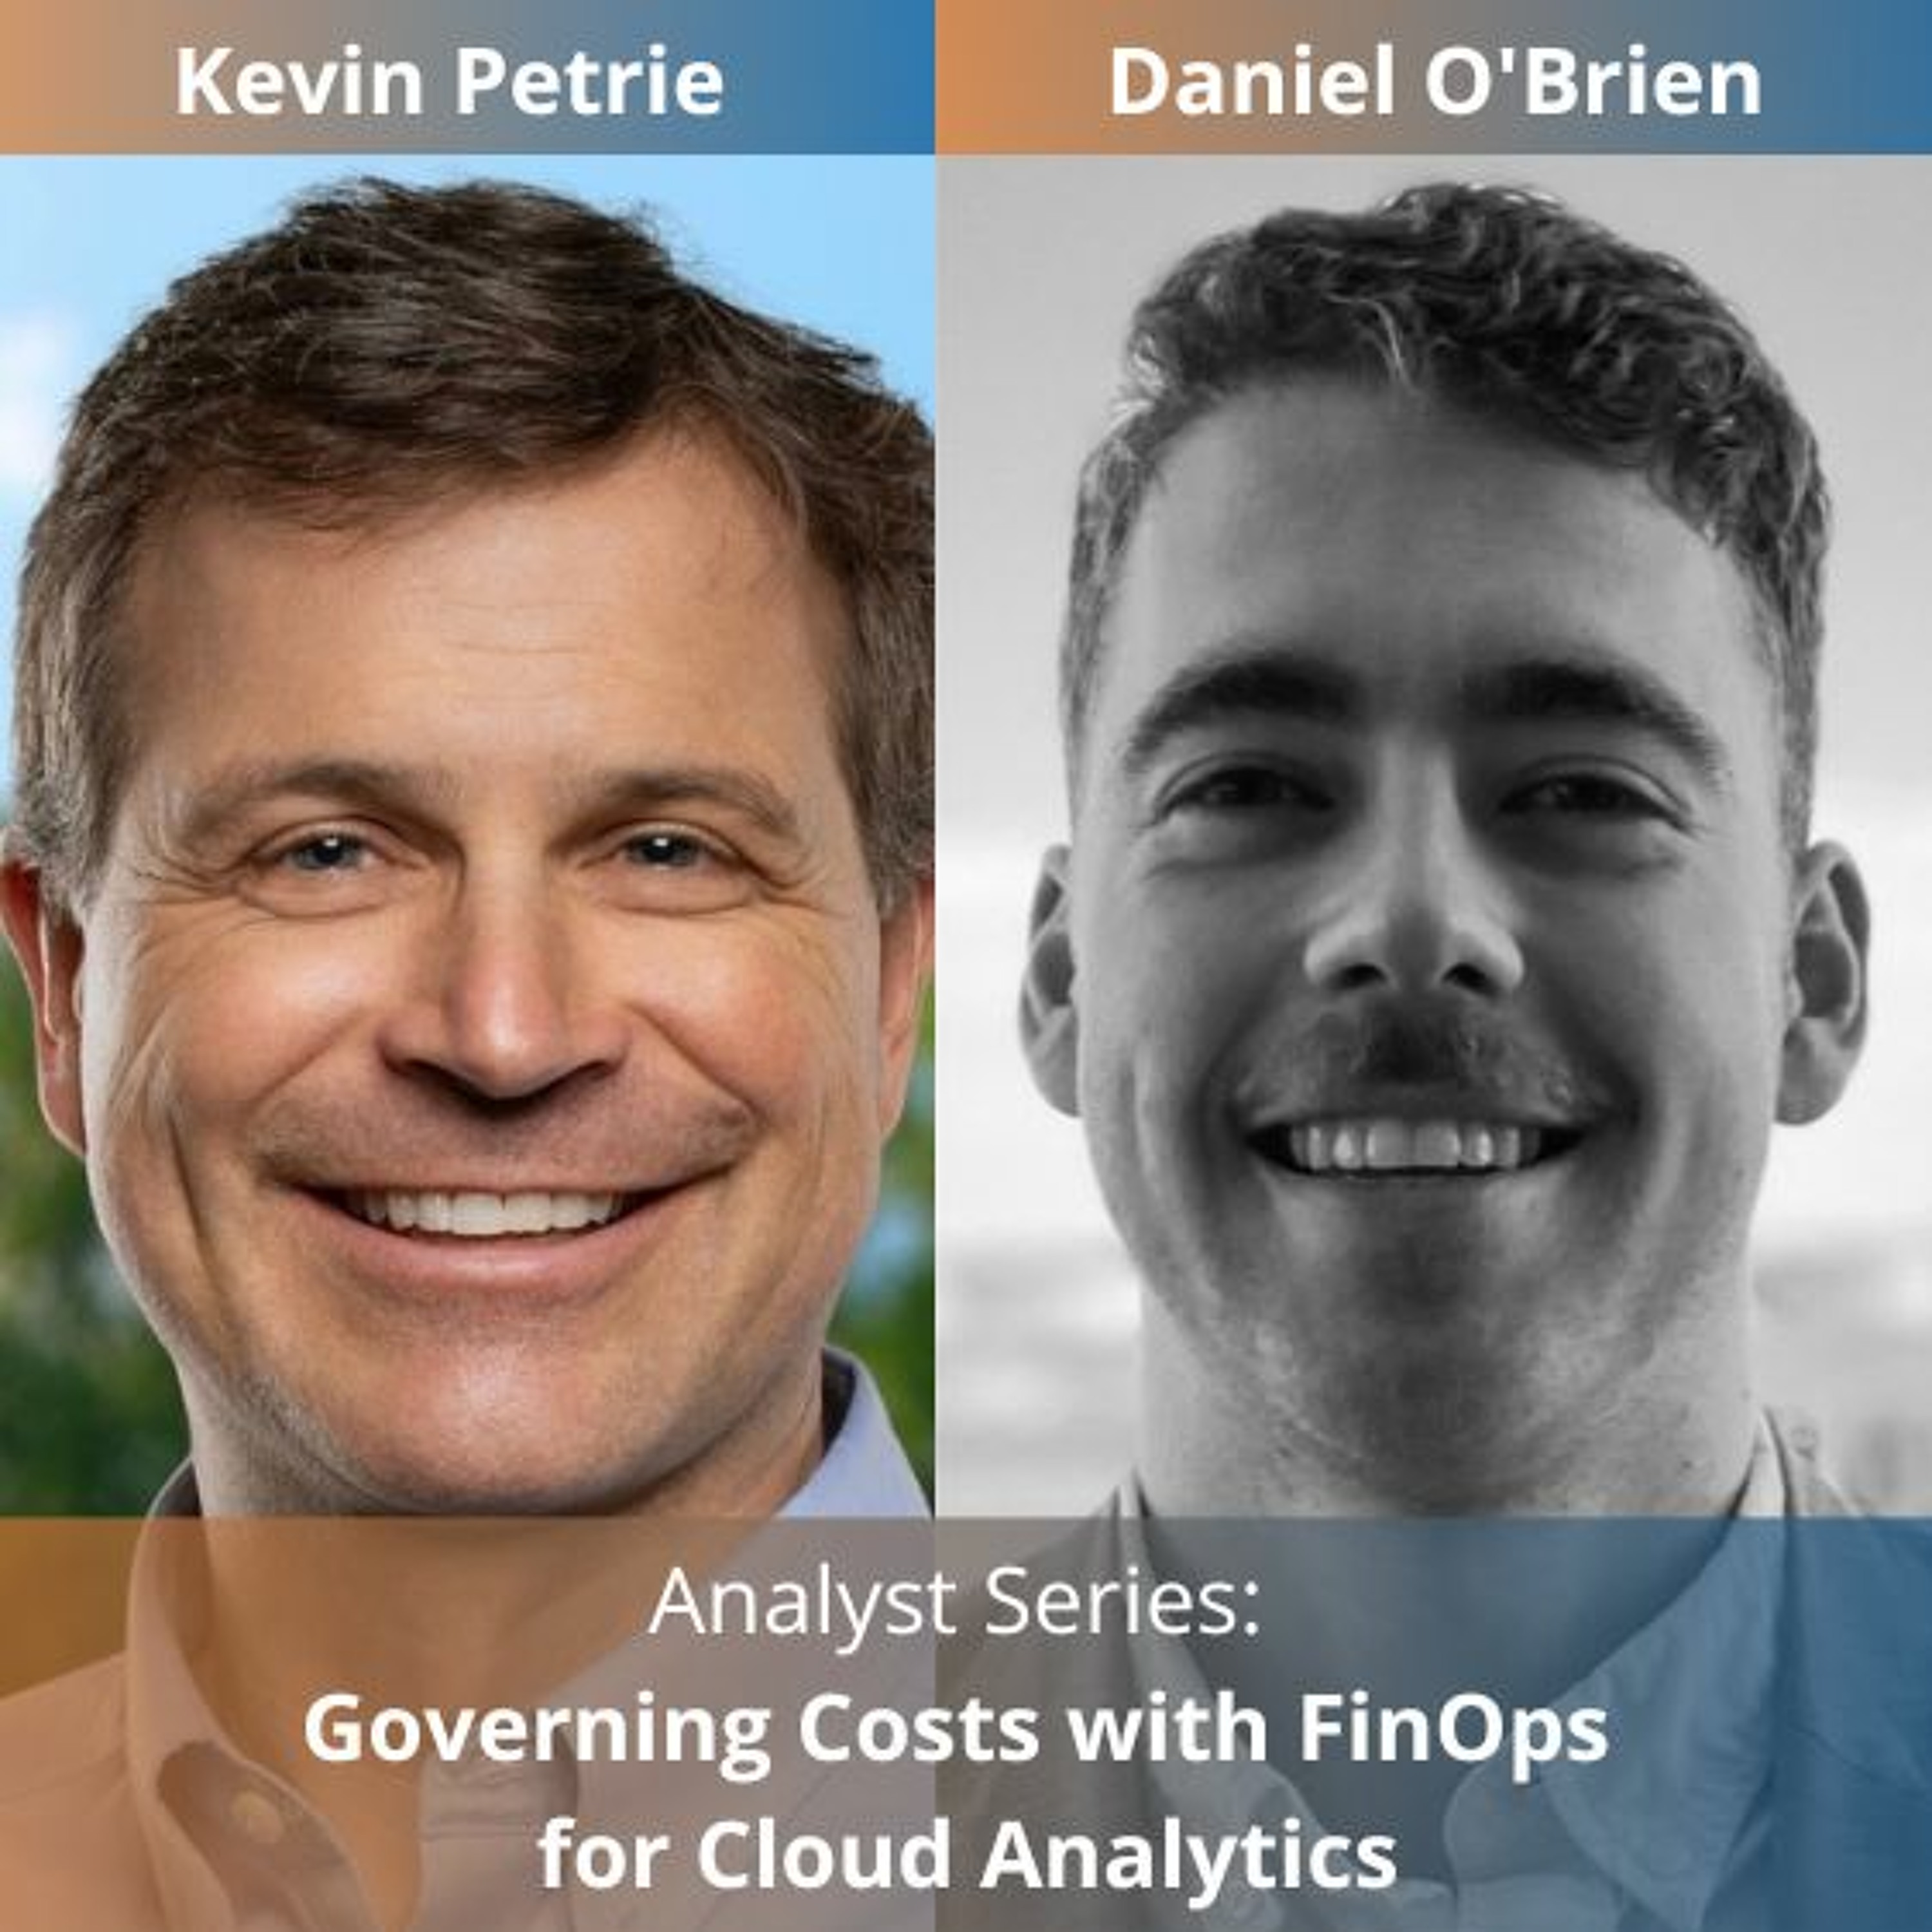 Analyst Series: Governing Costs with FinOps for Cloud Analytics